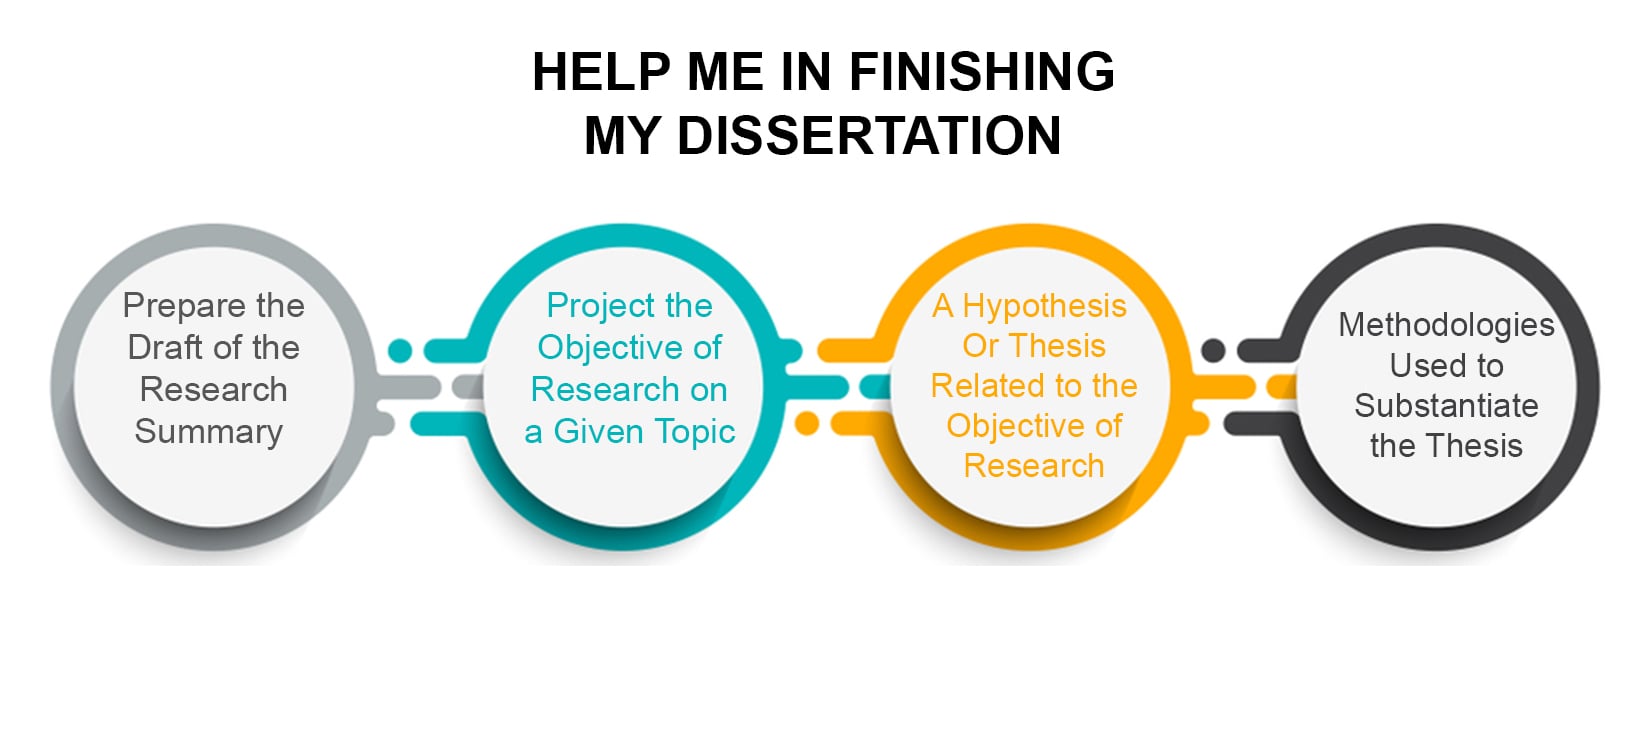 Help me finish my thesis |